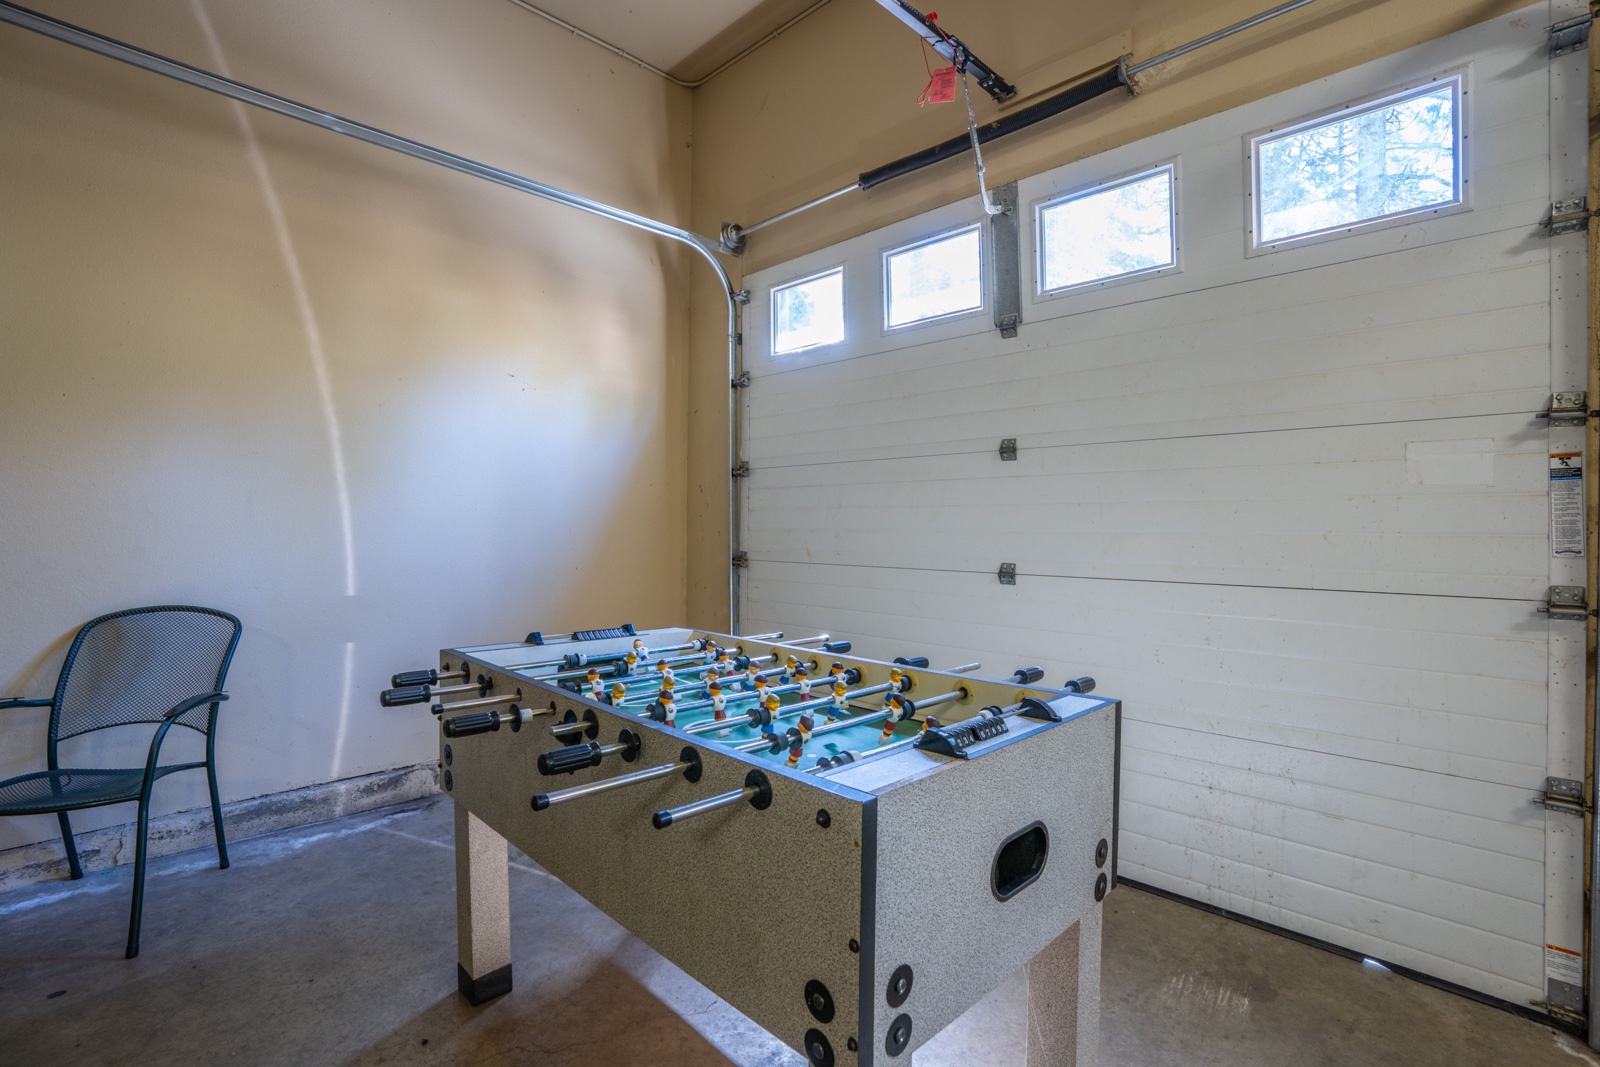 Unleash your competitive side with pool & foosball in the garage game area